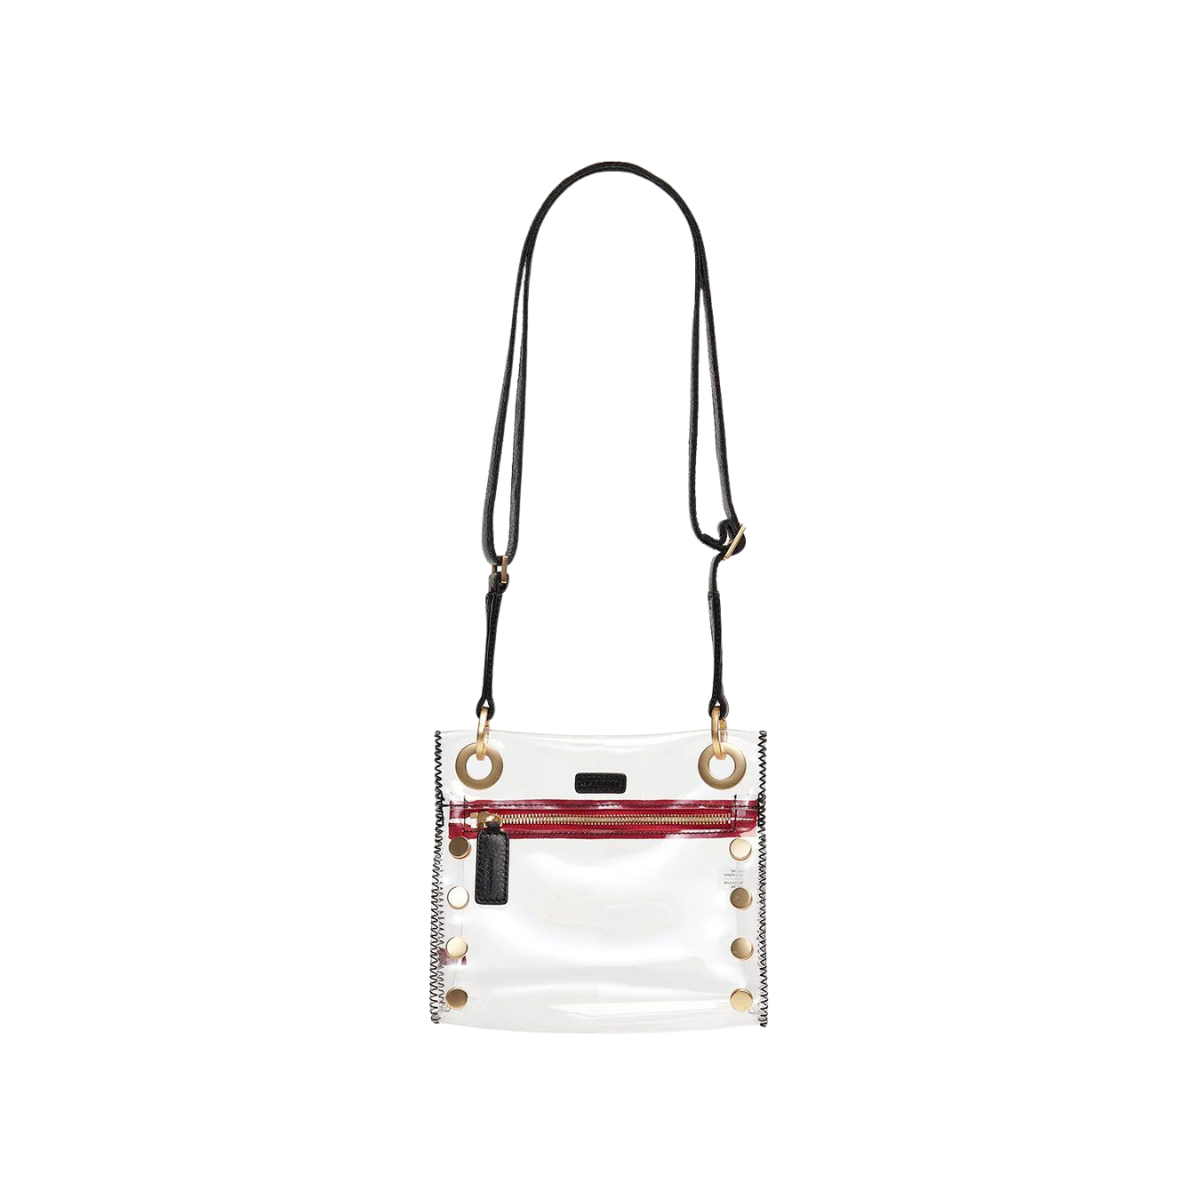 Hammitt Tony Small Crossbody Bag in Clear Black with Brushed Gold and Red Zip